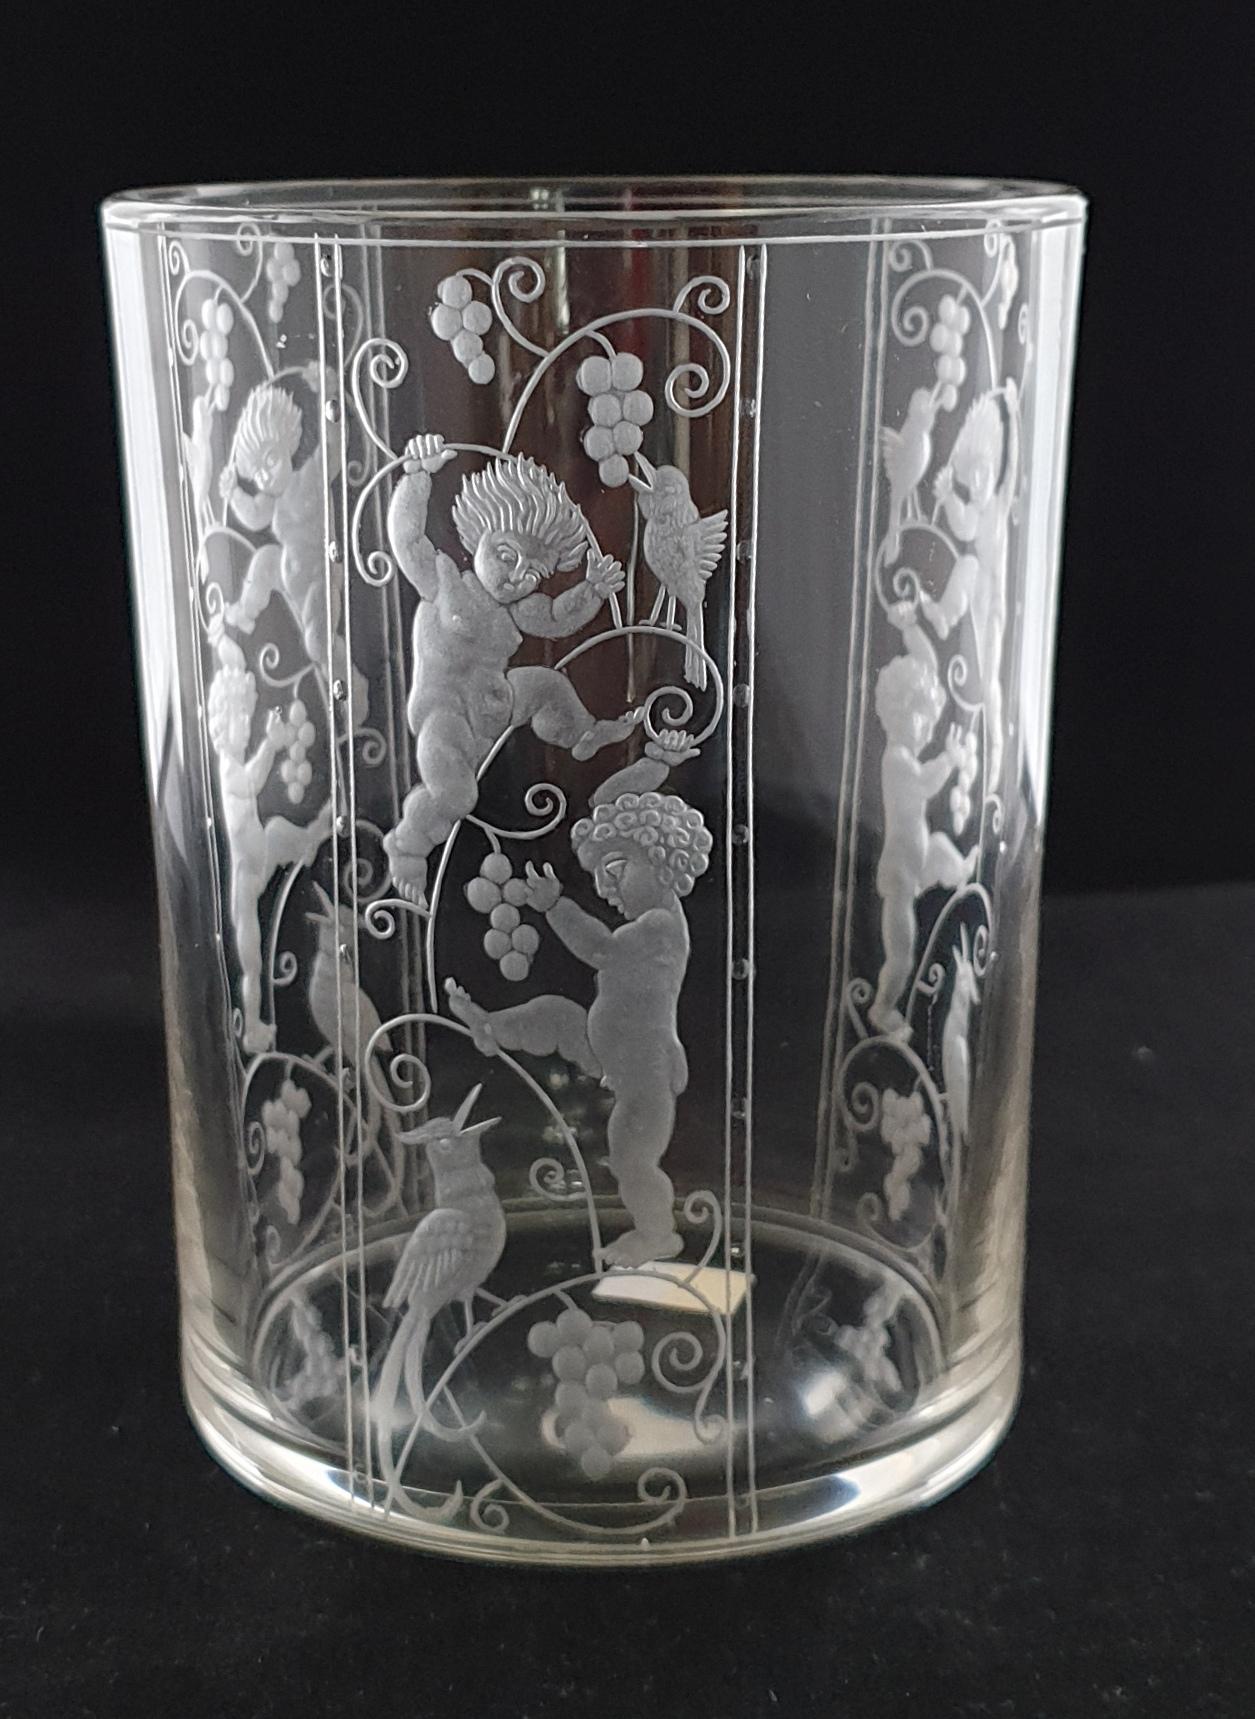 Fabulous art glass tumbler, designed by Michael Powolny, engraved by Max Rossler. 

Signed.